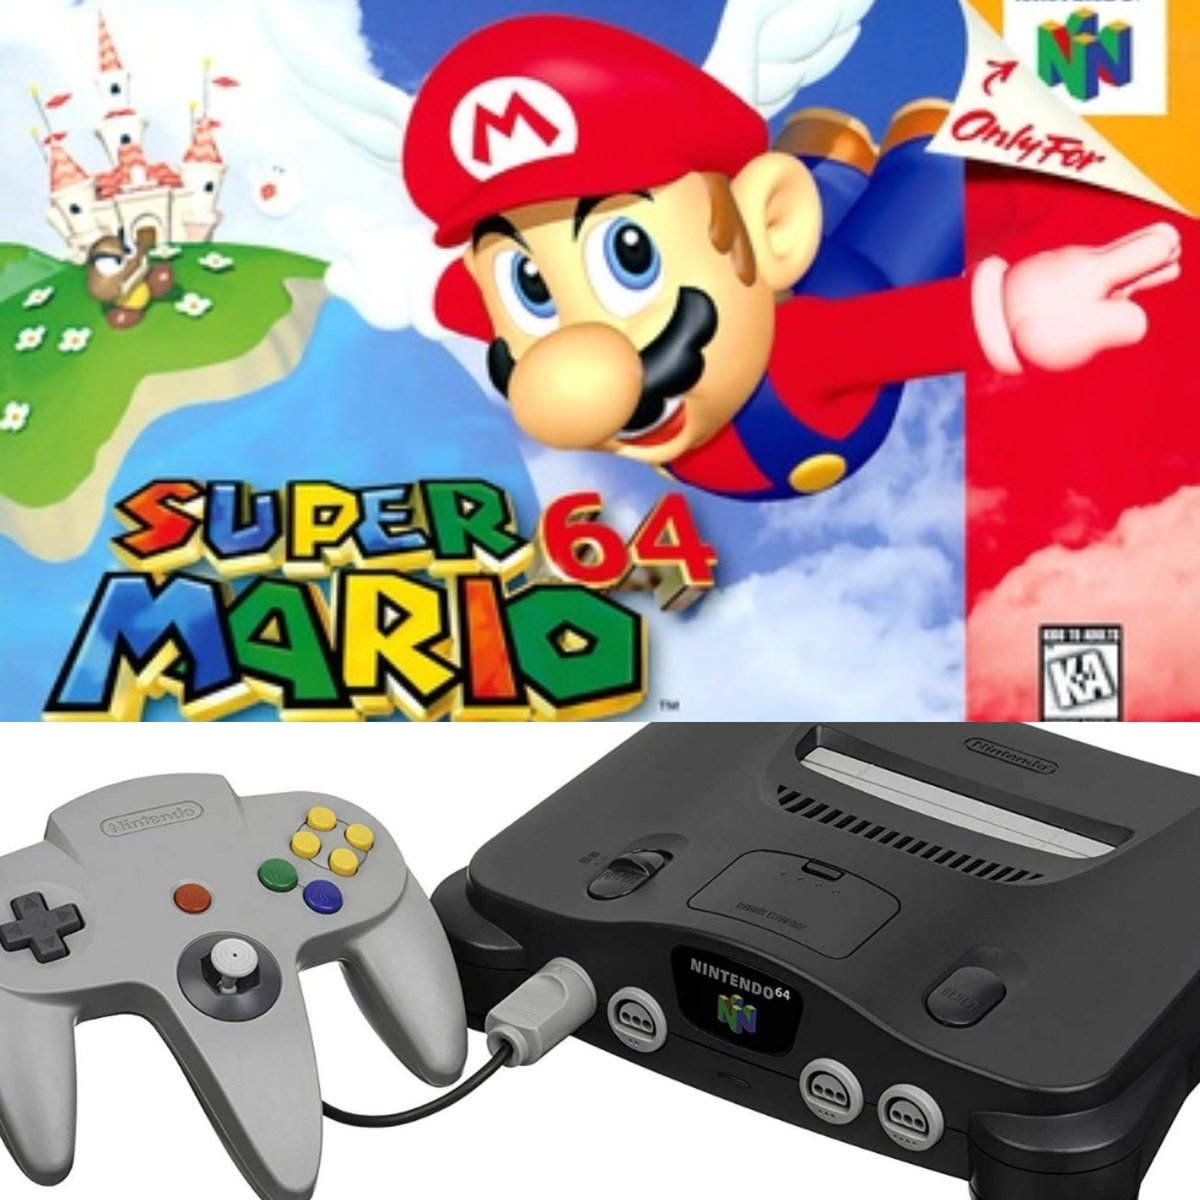 Today's also the 27th anniversaries of the @Nintendo 64 and 'Super Mario 64.' 
#anniversaries #27thanniversary #NINTENDO64 #SuperMario64 #MarioBros #SuperMarioVideoGame